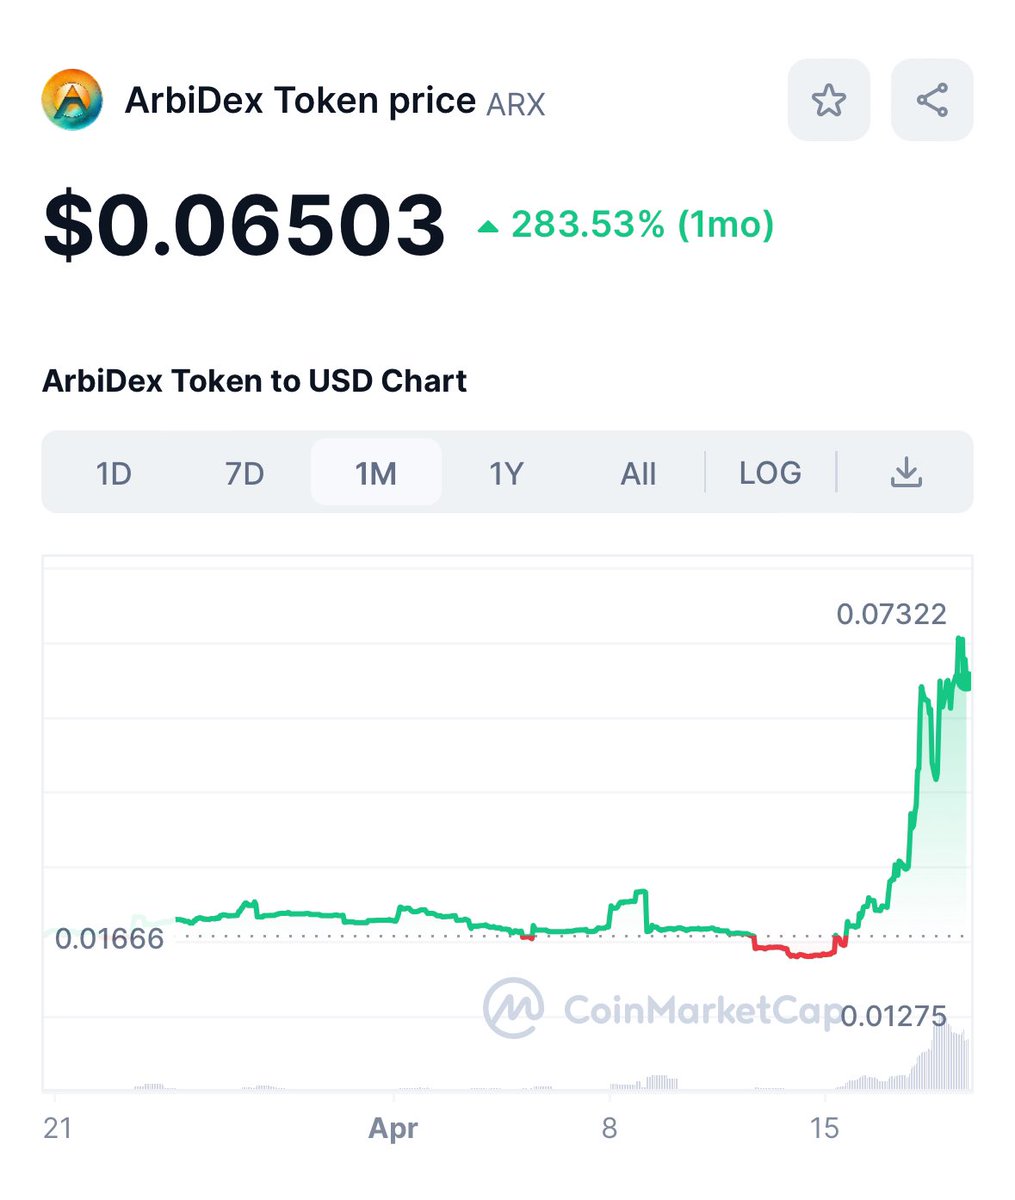 💥 BOOM!!! 🚨🚨ATH OF .073 REACHED TODAY!!! Once @ArbidexFi passes 10 cents we will be on our way to $1! @ArbidexFi is the main DEX for @arbitrum @BaseSwapDex $ARX $BSWAP $AERO $VELO $SONNE $UNI $SWAPB $ARB $PBR $BOOP $BRETT $DEX $XRP $BTC $SOLO 🚨🚨🚨🚨🚨🚨🚨🚨🚨🚨🚨🚨🚨